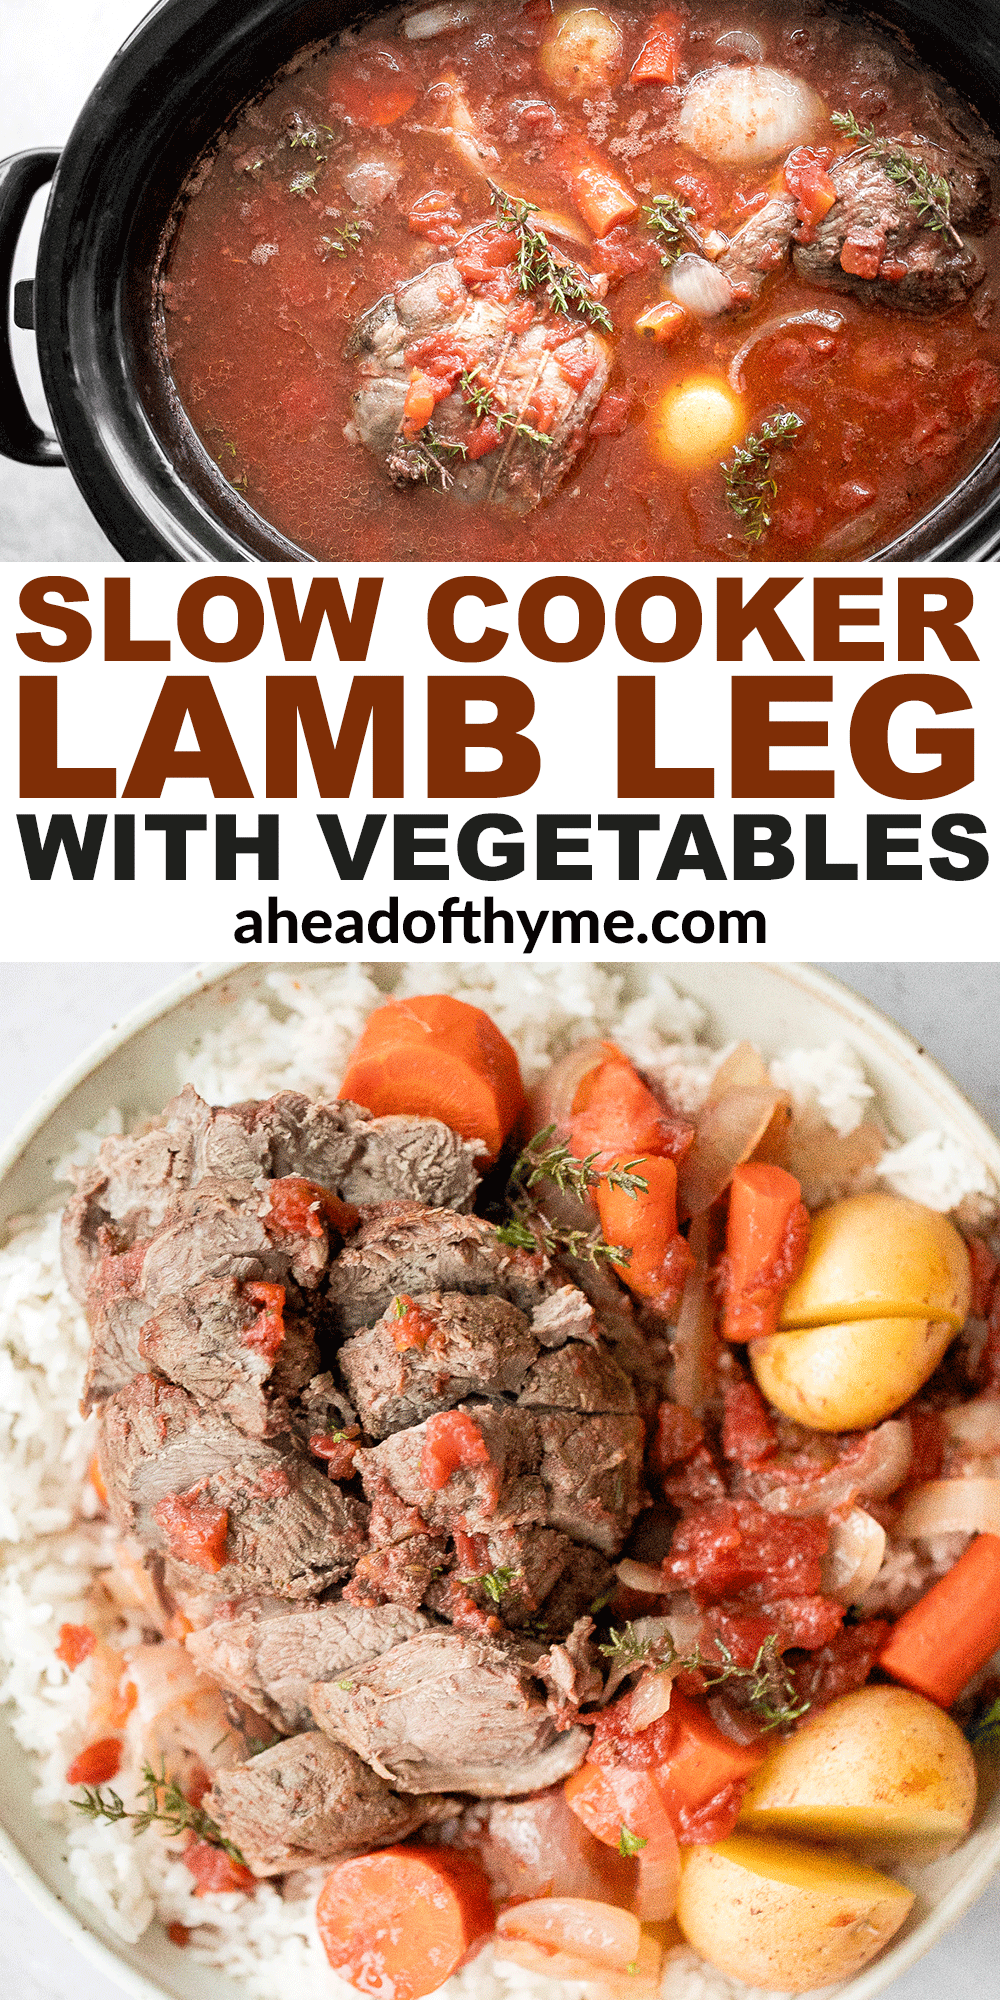 Slow Cooker Leg of Lamb with Vegetables